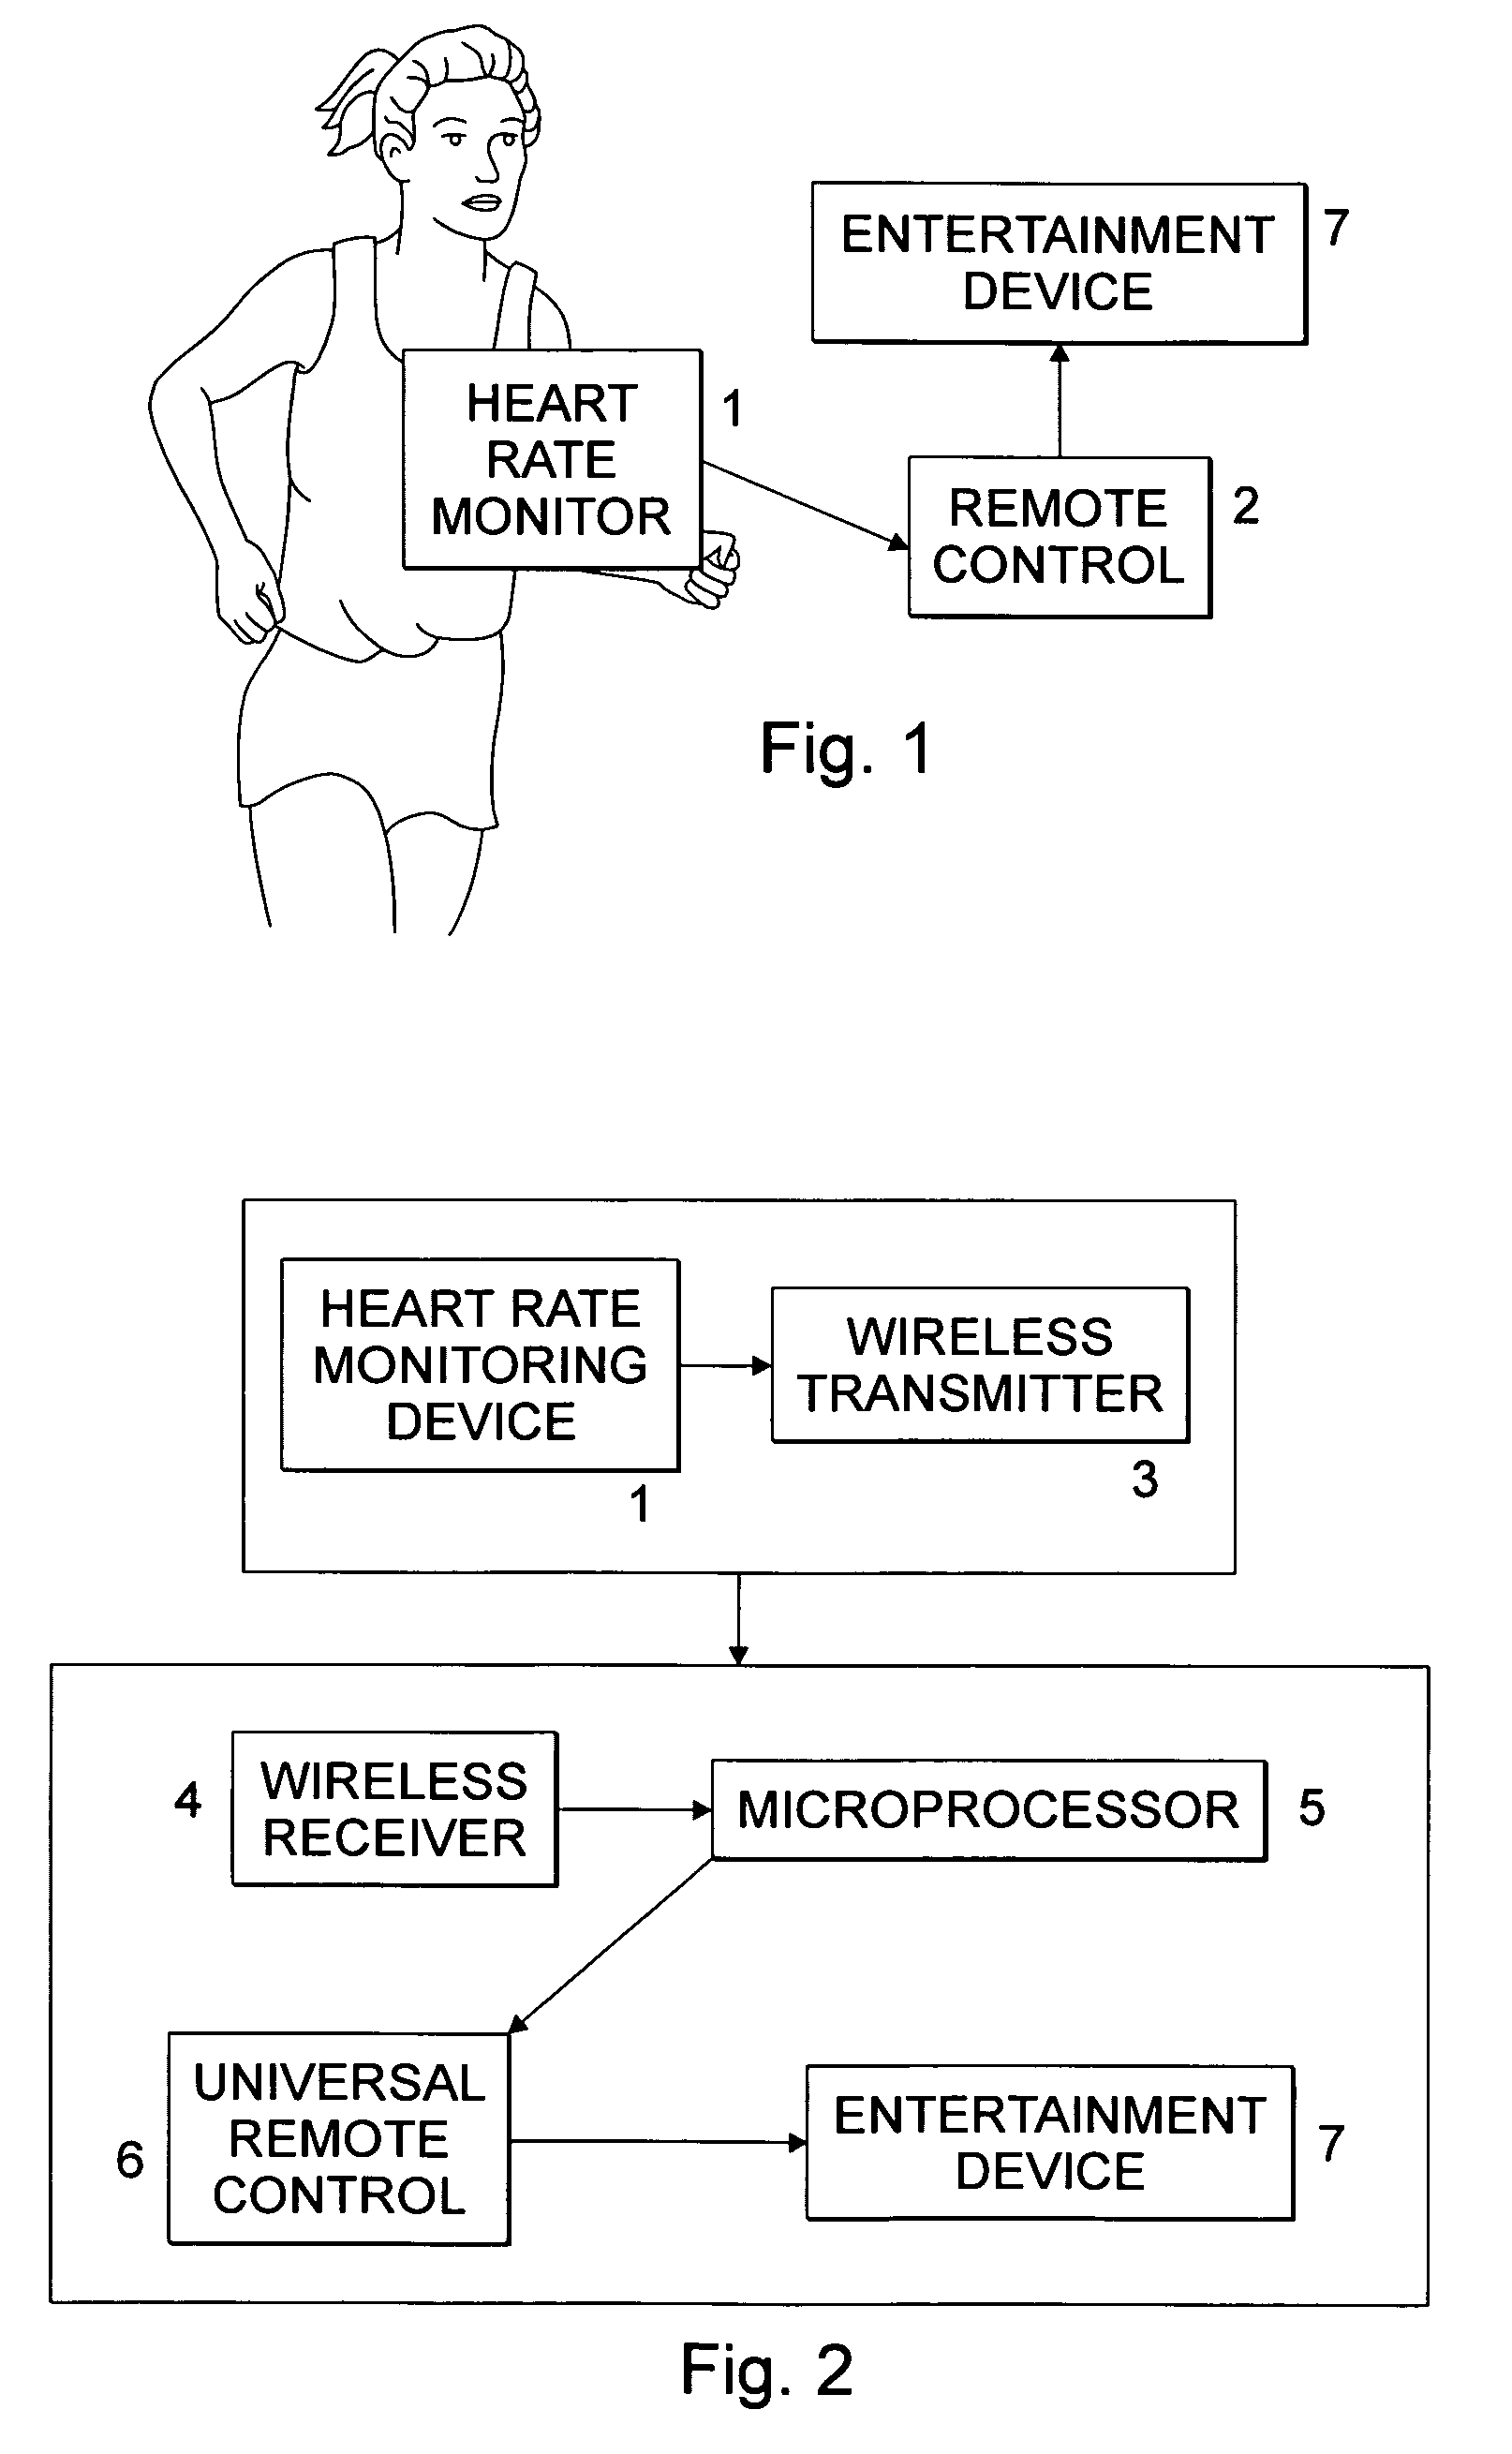 Heart rate monitor for controlling entertainment devices